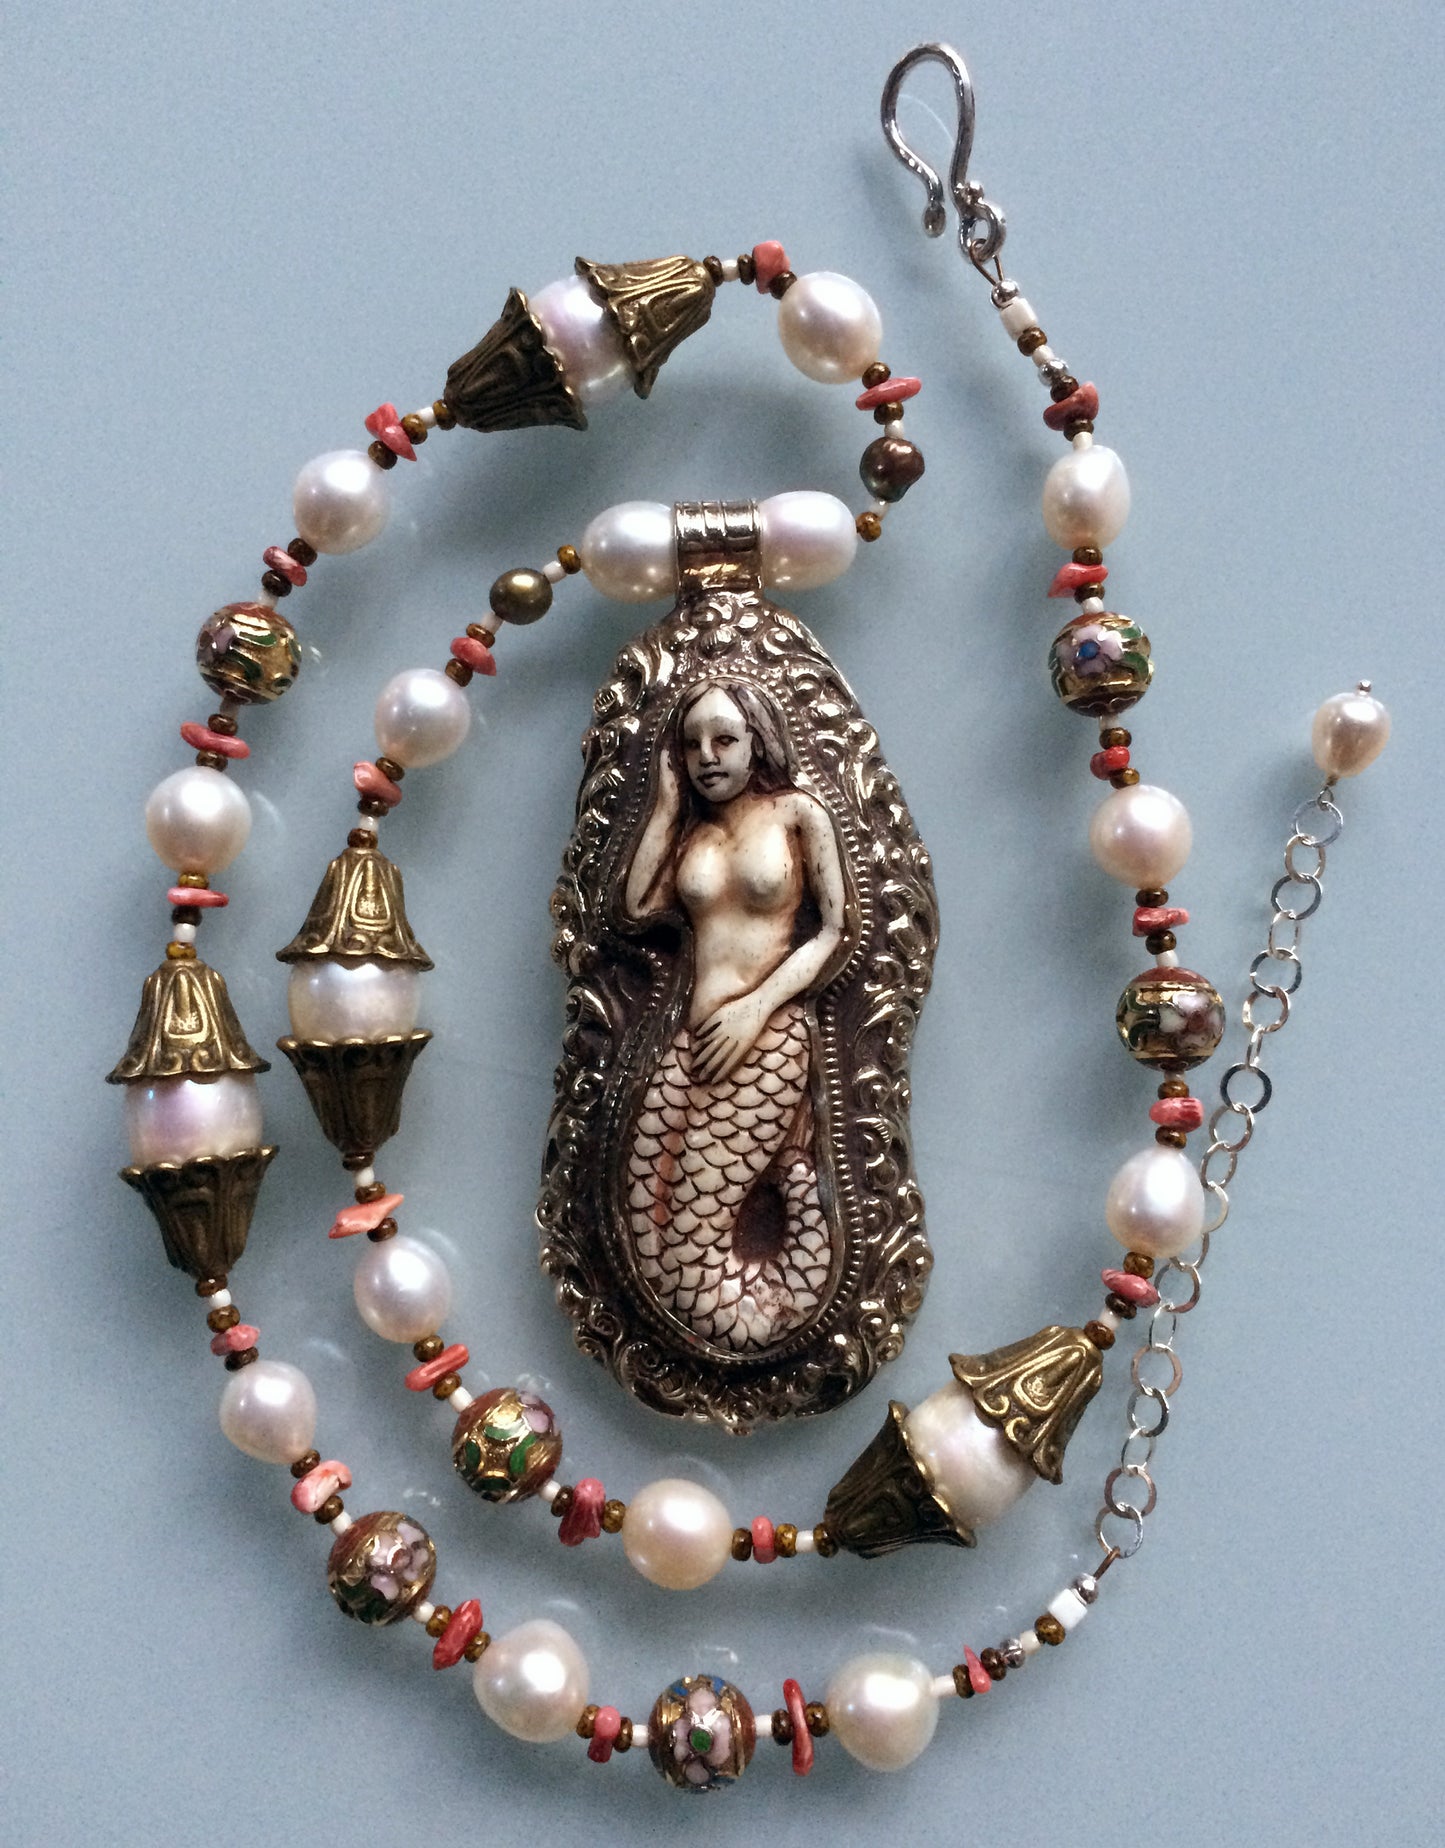 Carved Bone Mermaid Centerpiece from Nepal with Freshwater Pearls, Coral and Cloisonne